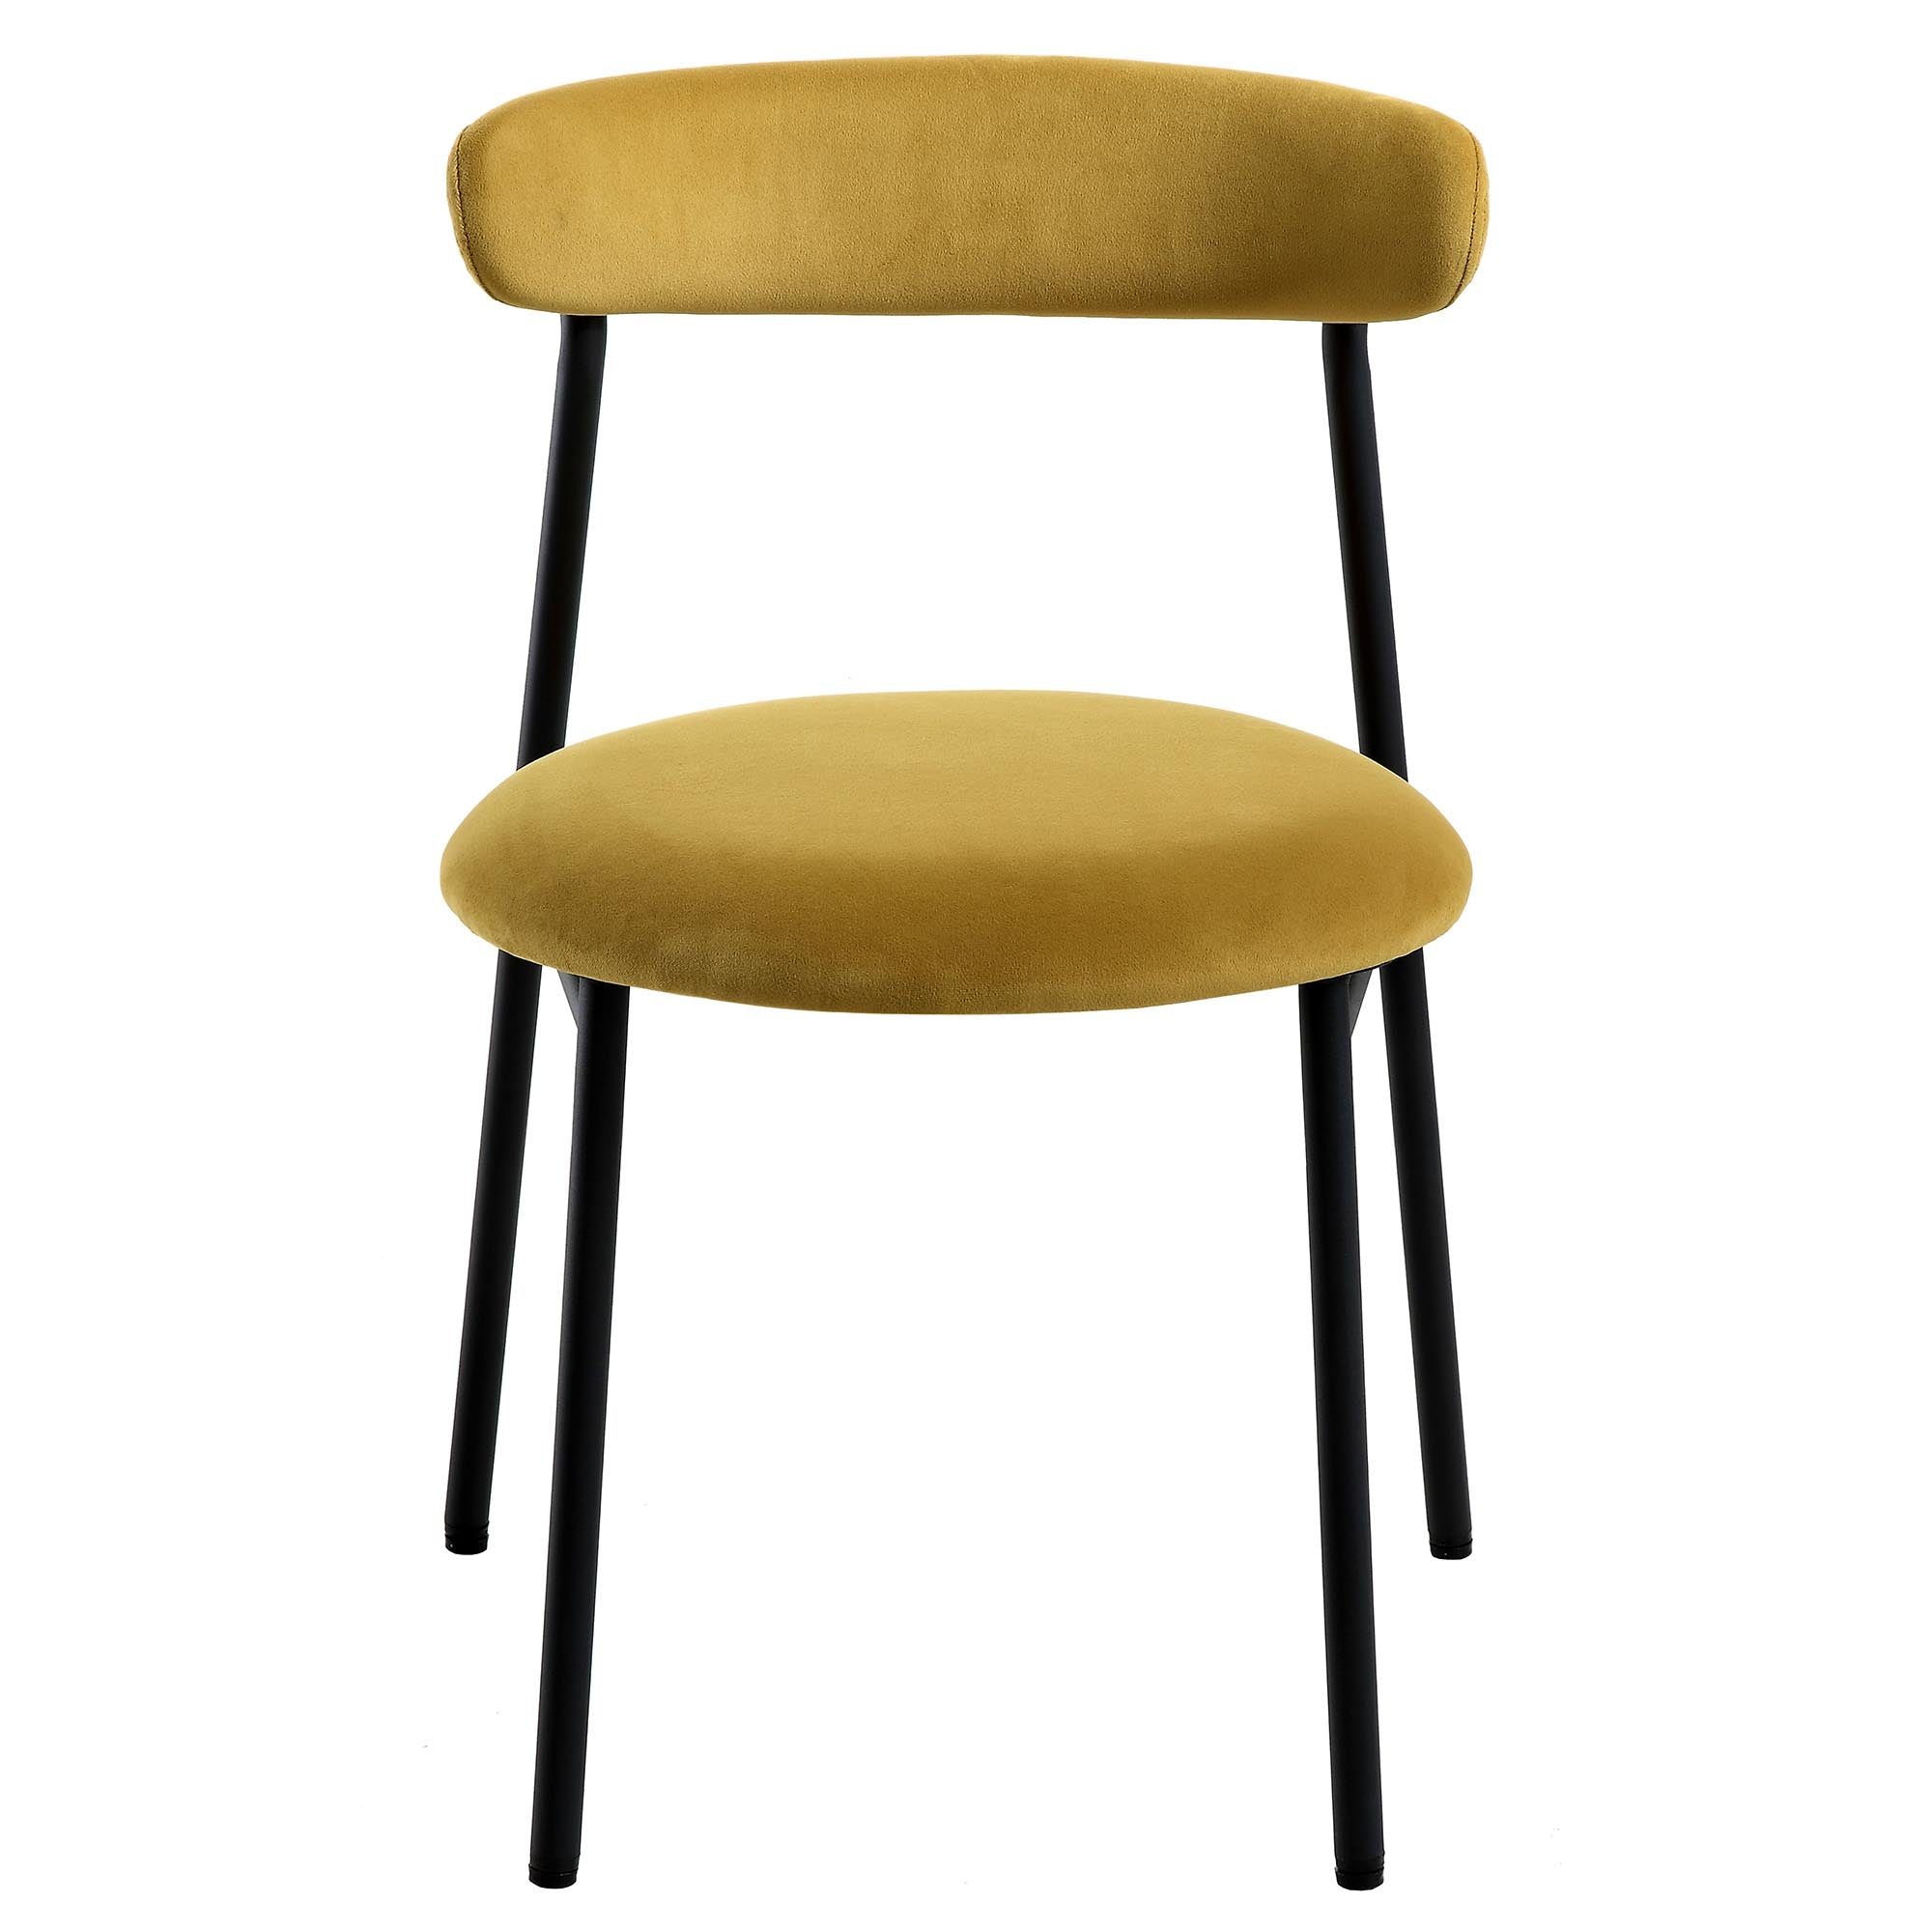 Donna Set of 2 Mustard Yellow Velvet Dining Chairs